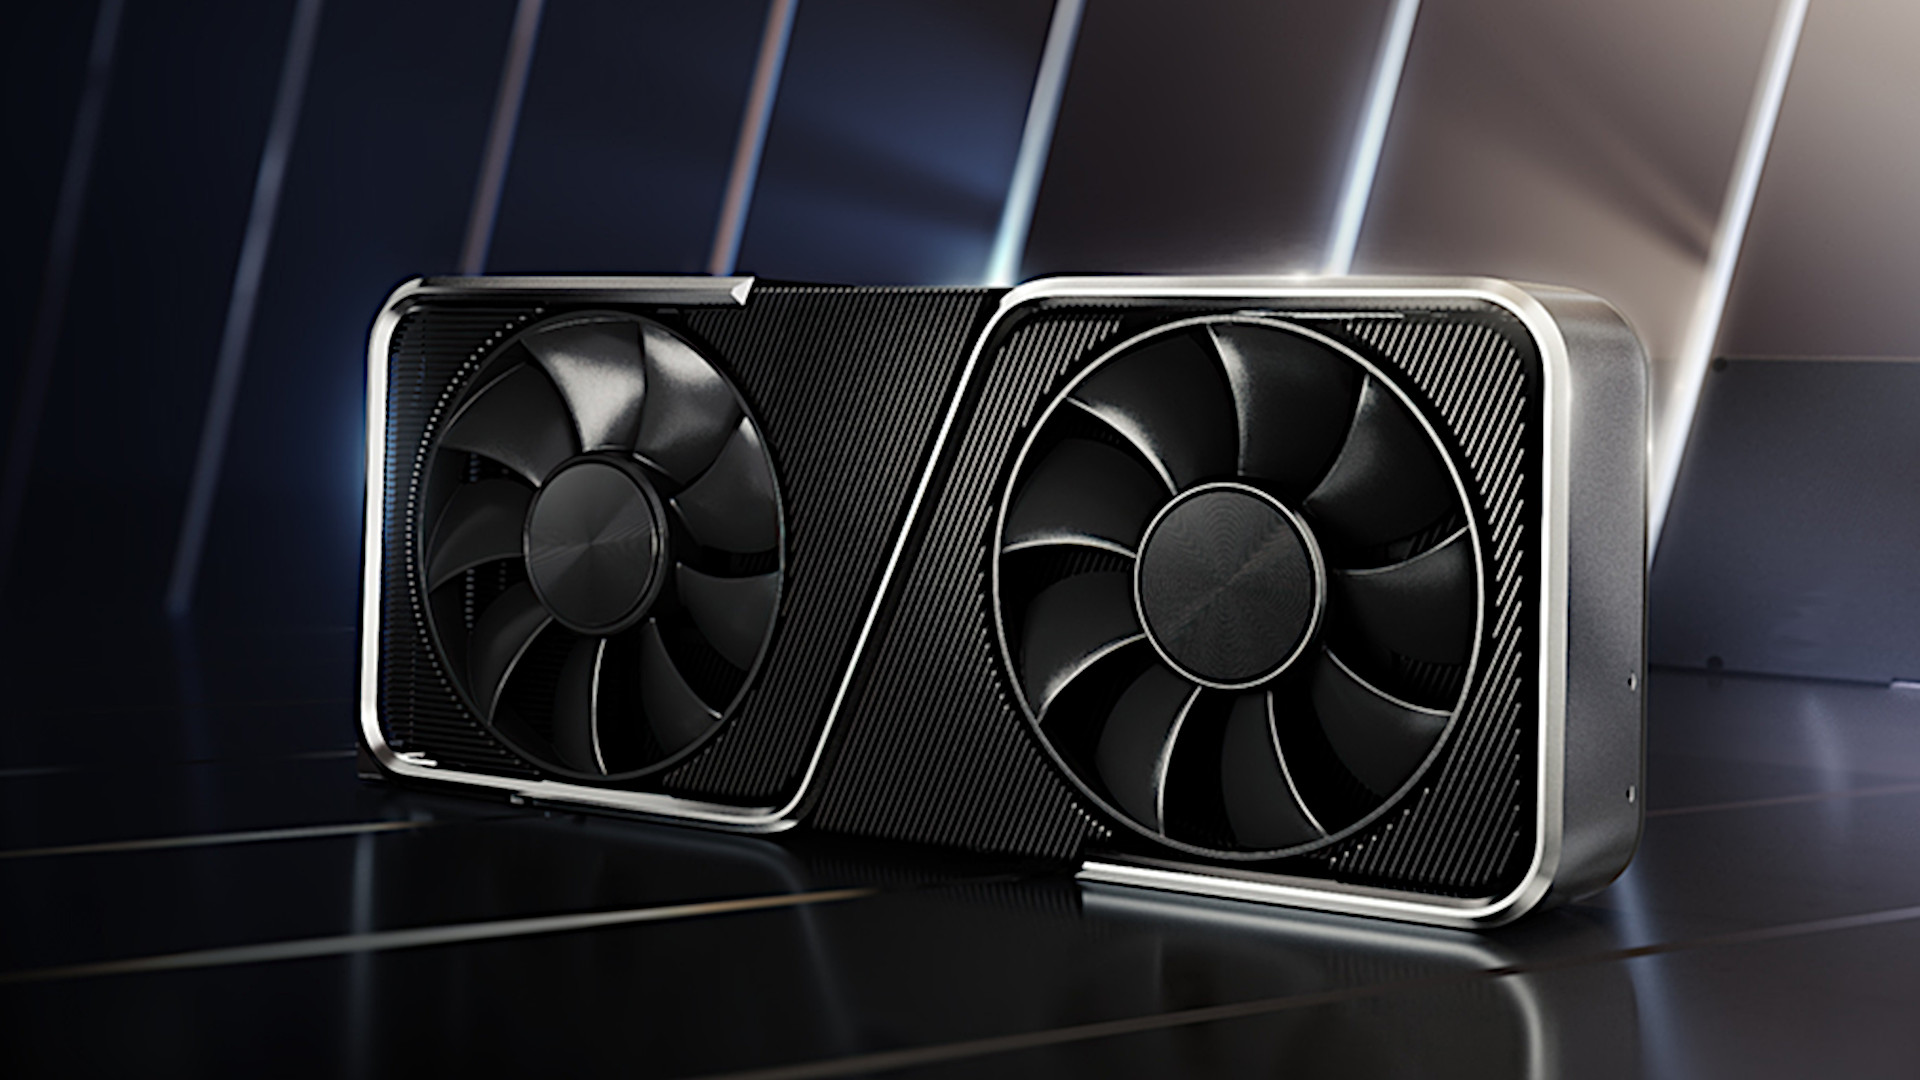 Nvidia GeForce RTX 3060 GPU wins the hearts and wallets of Steam users